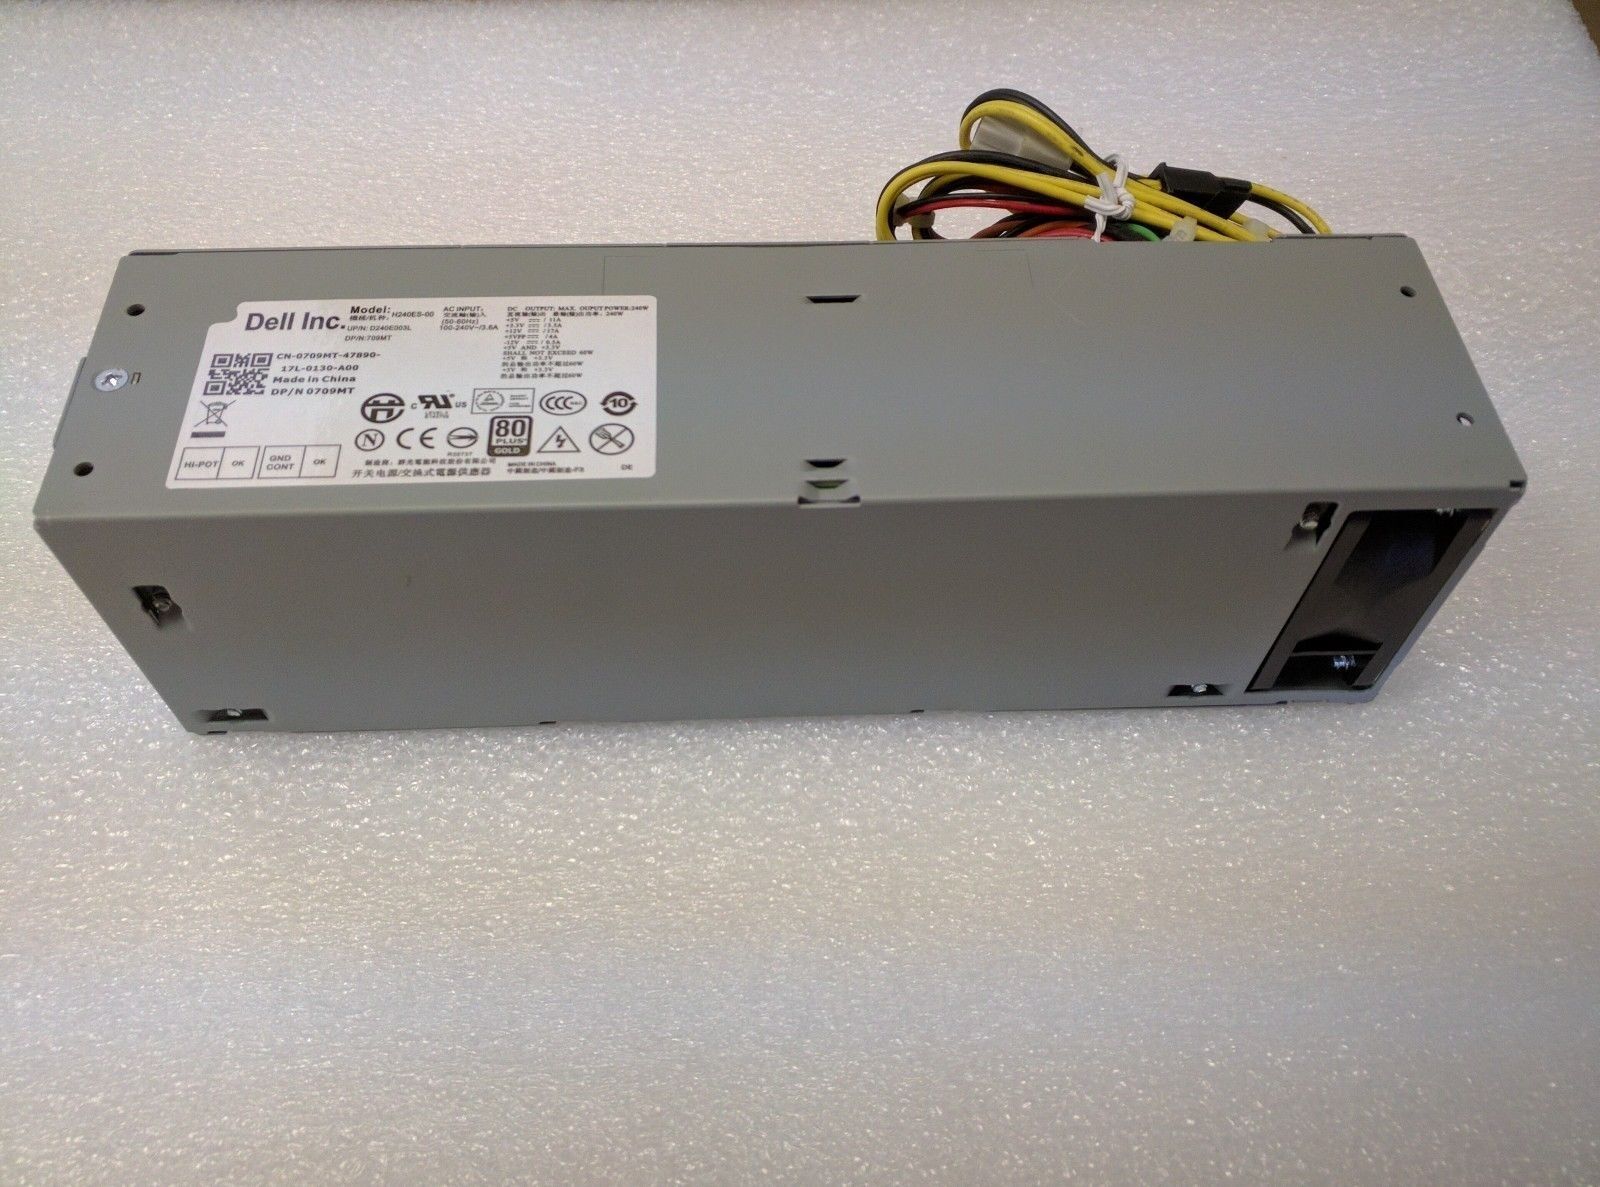 240w Dell D240AS-00 DPS-240AB-5 A SFF Power Supply DL240.09